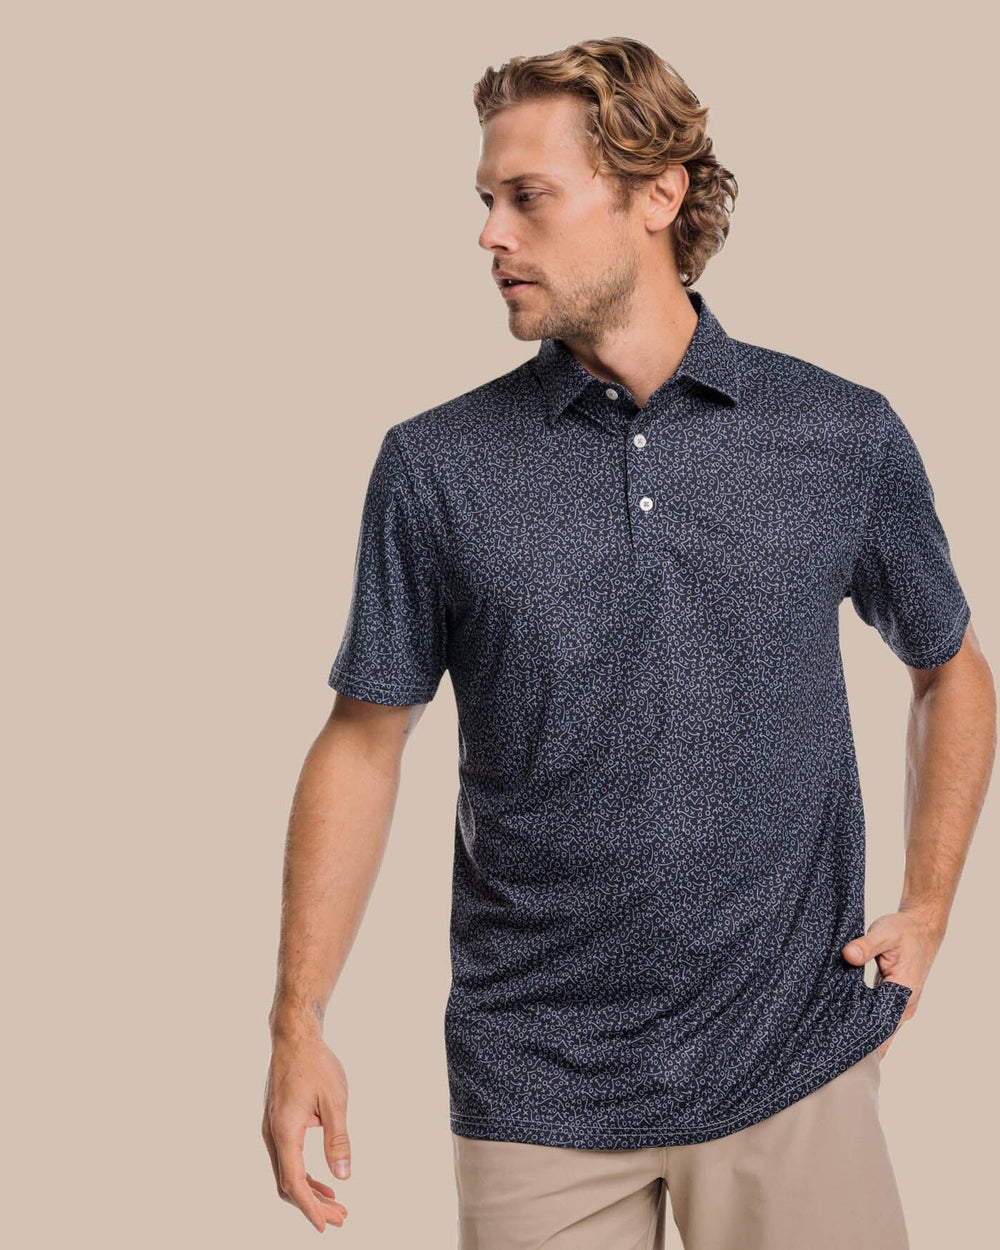 The front view of the Southern Tide Driver Gameplay Polo by Southern Tide - Black